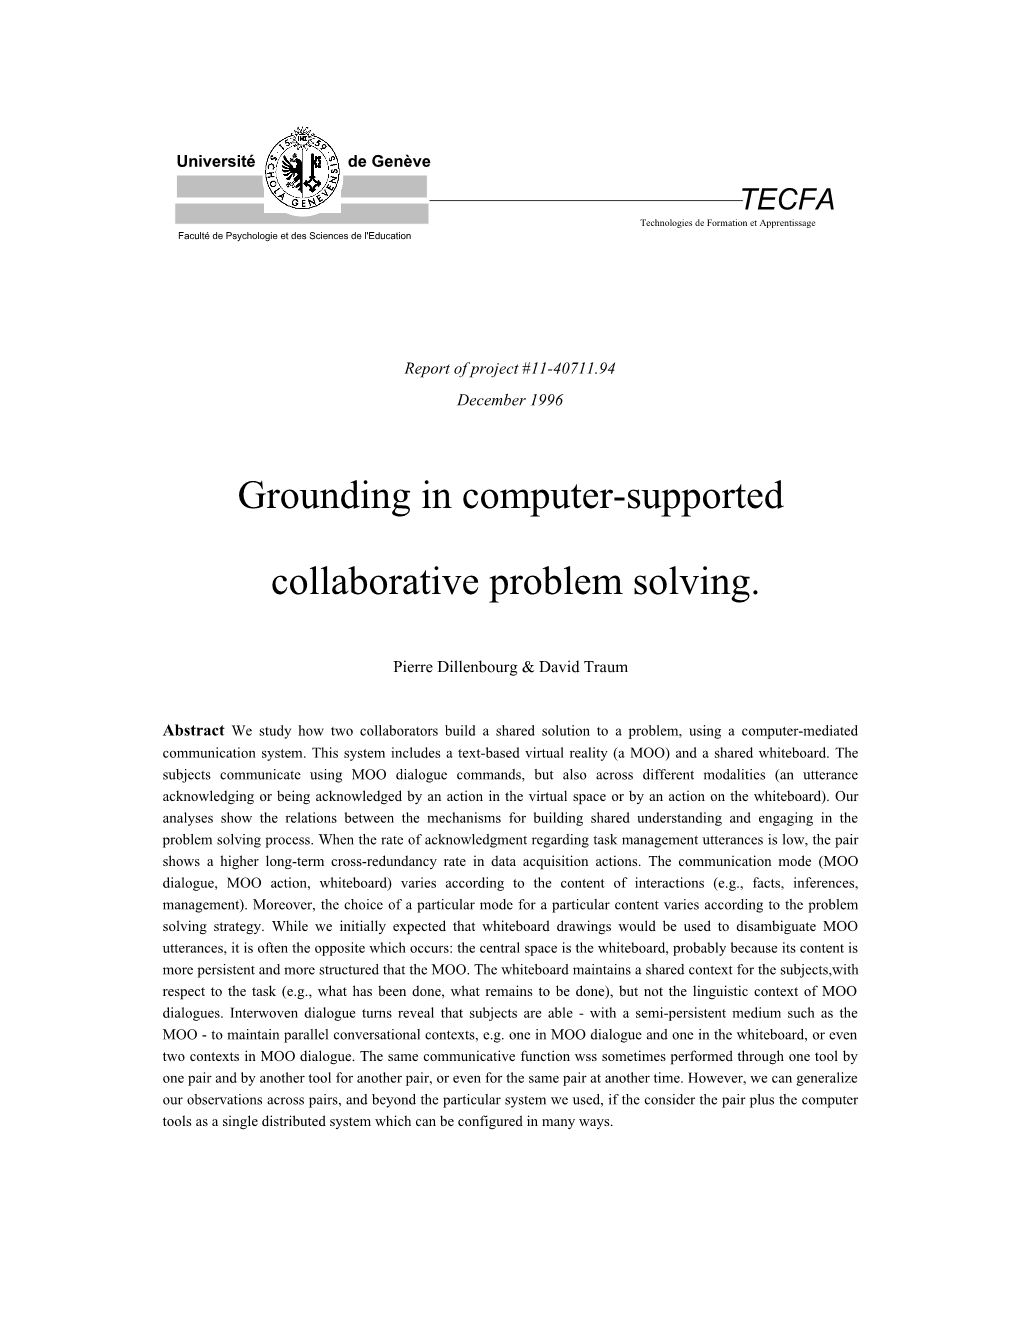 Grounding in Computer Supported Collabrative Problem Solving